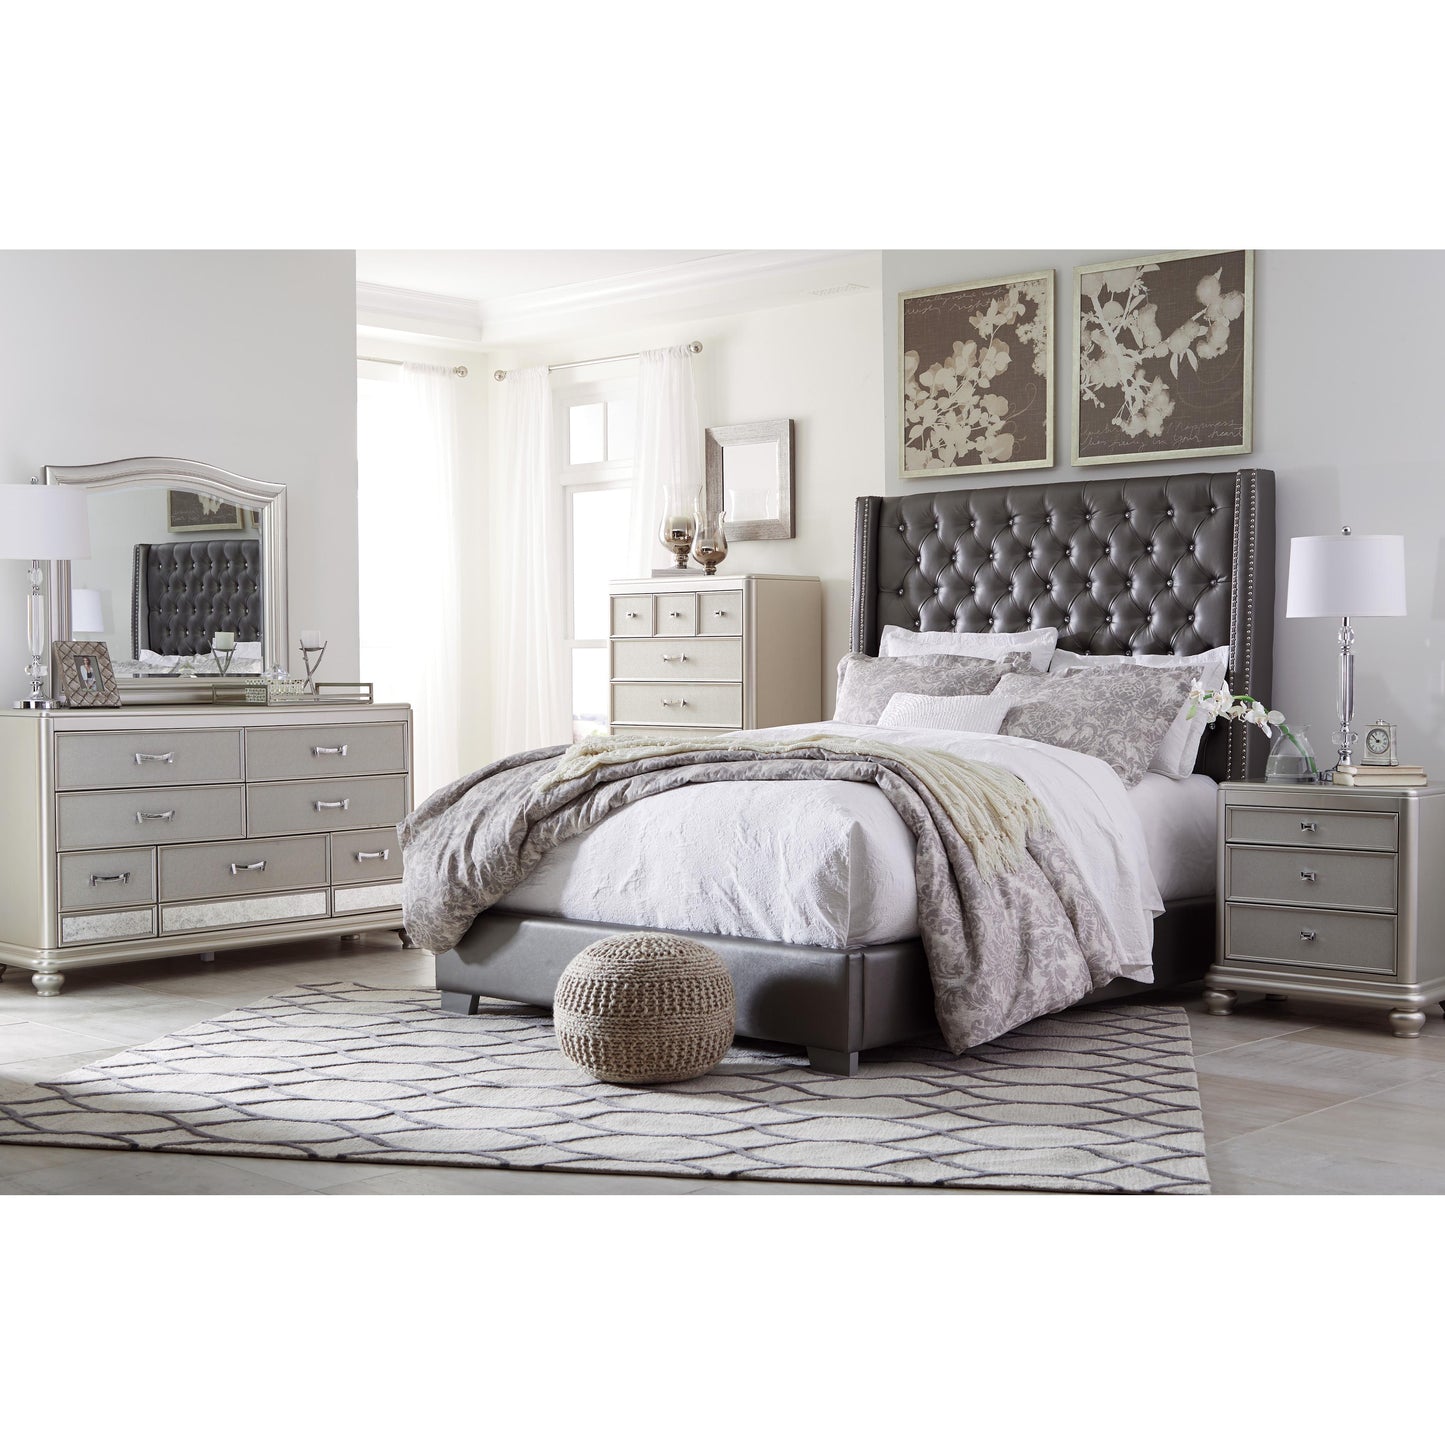 Signature Design by Ashley Coralayne B650B32 7 pc Queen Upholstered Bedroom Set IMAGE 2